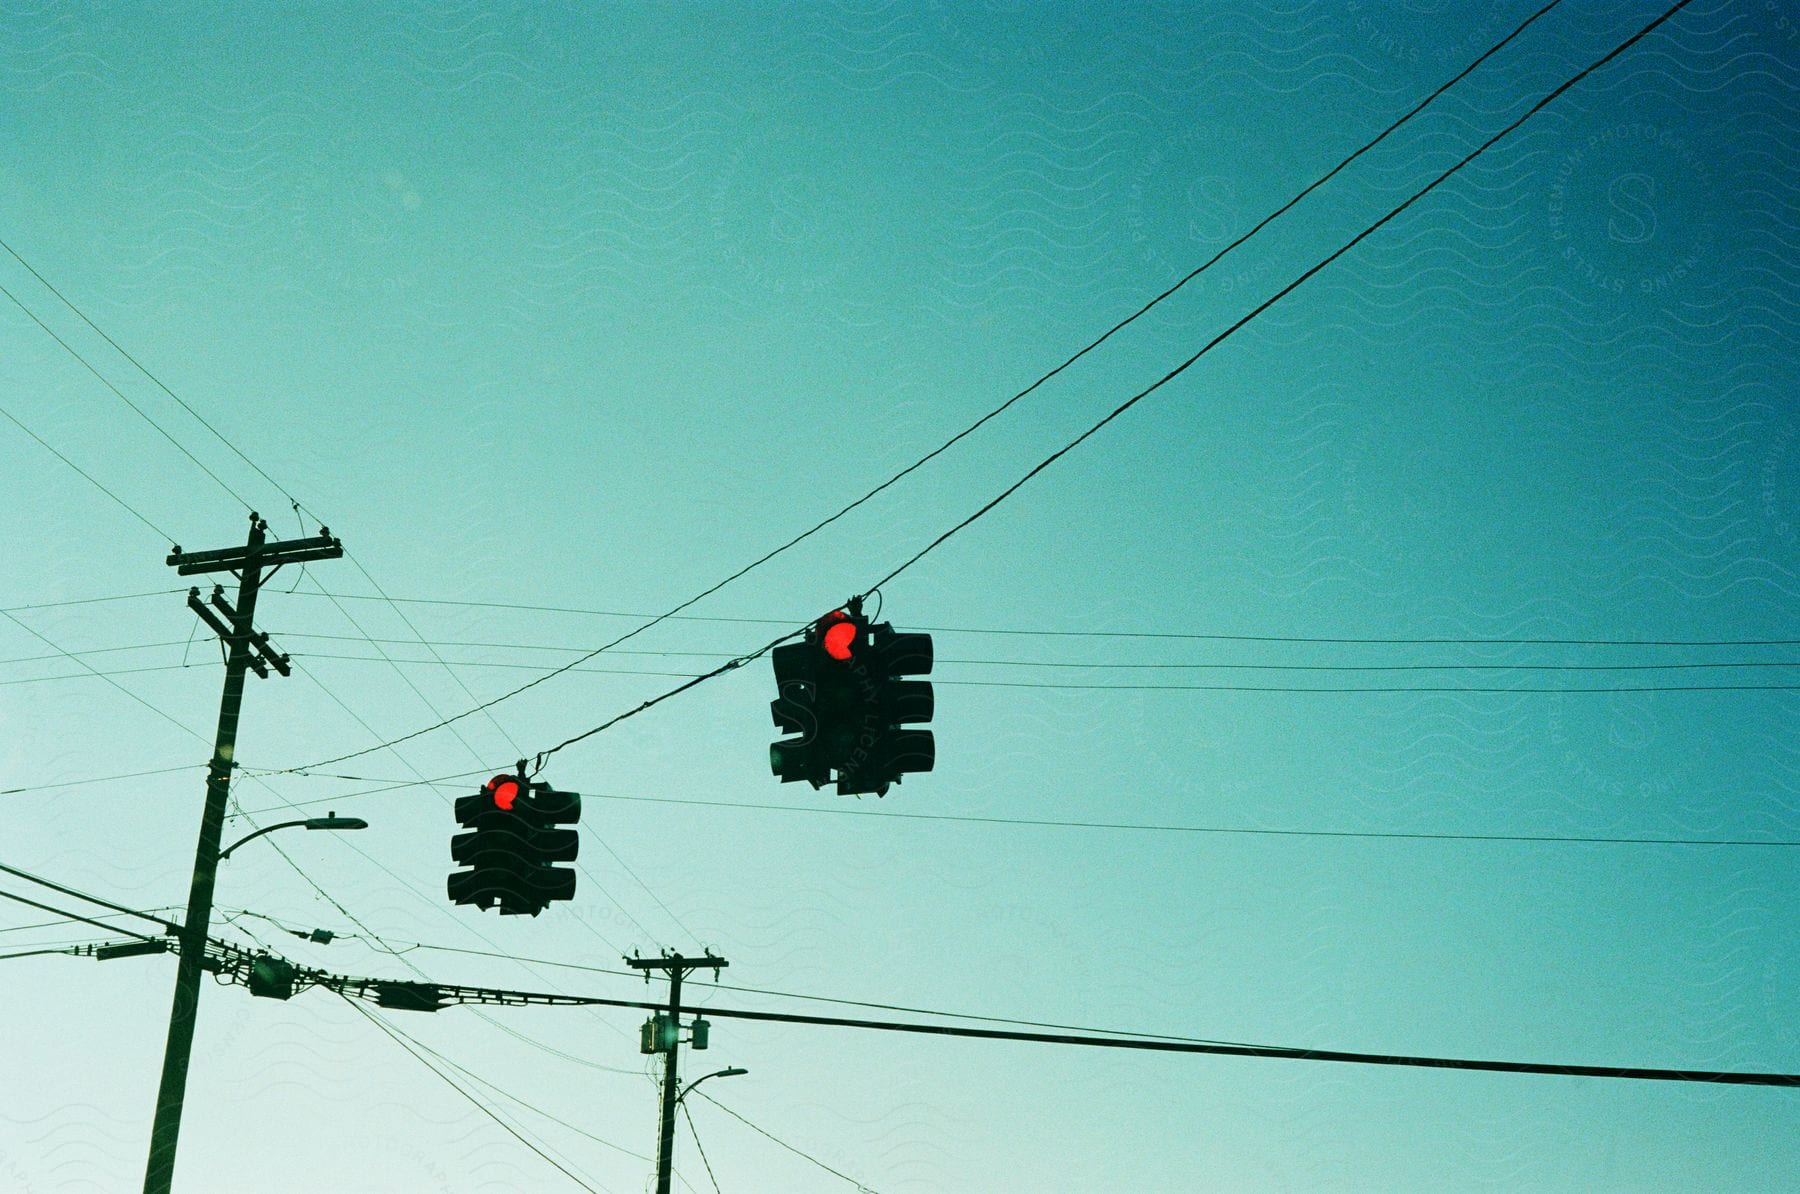 Traffic signals shine red at intersection crisscrossed by power lines.